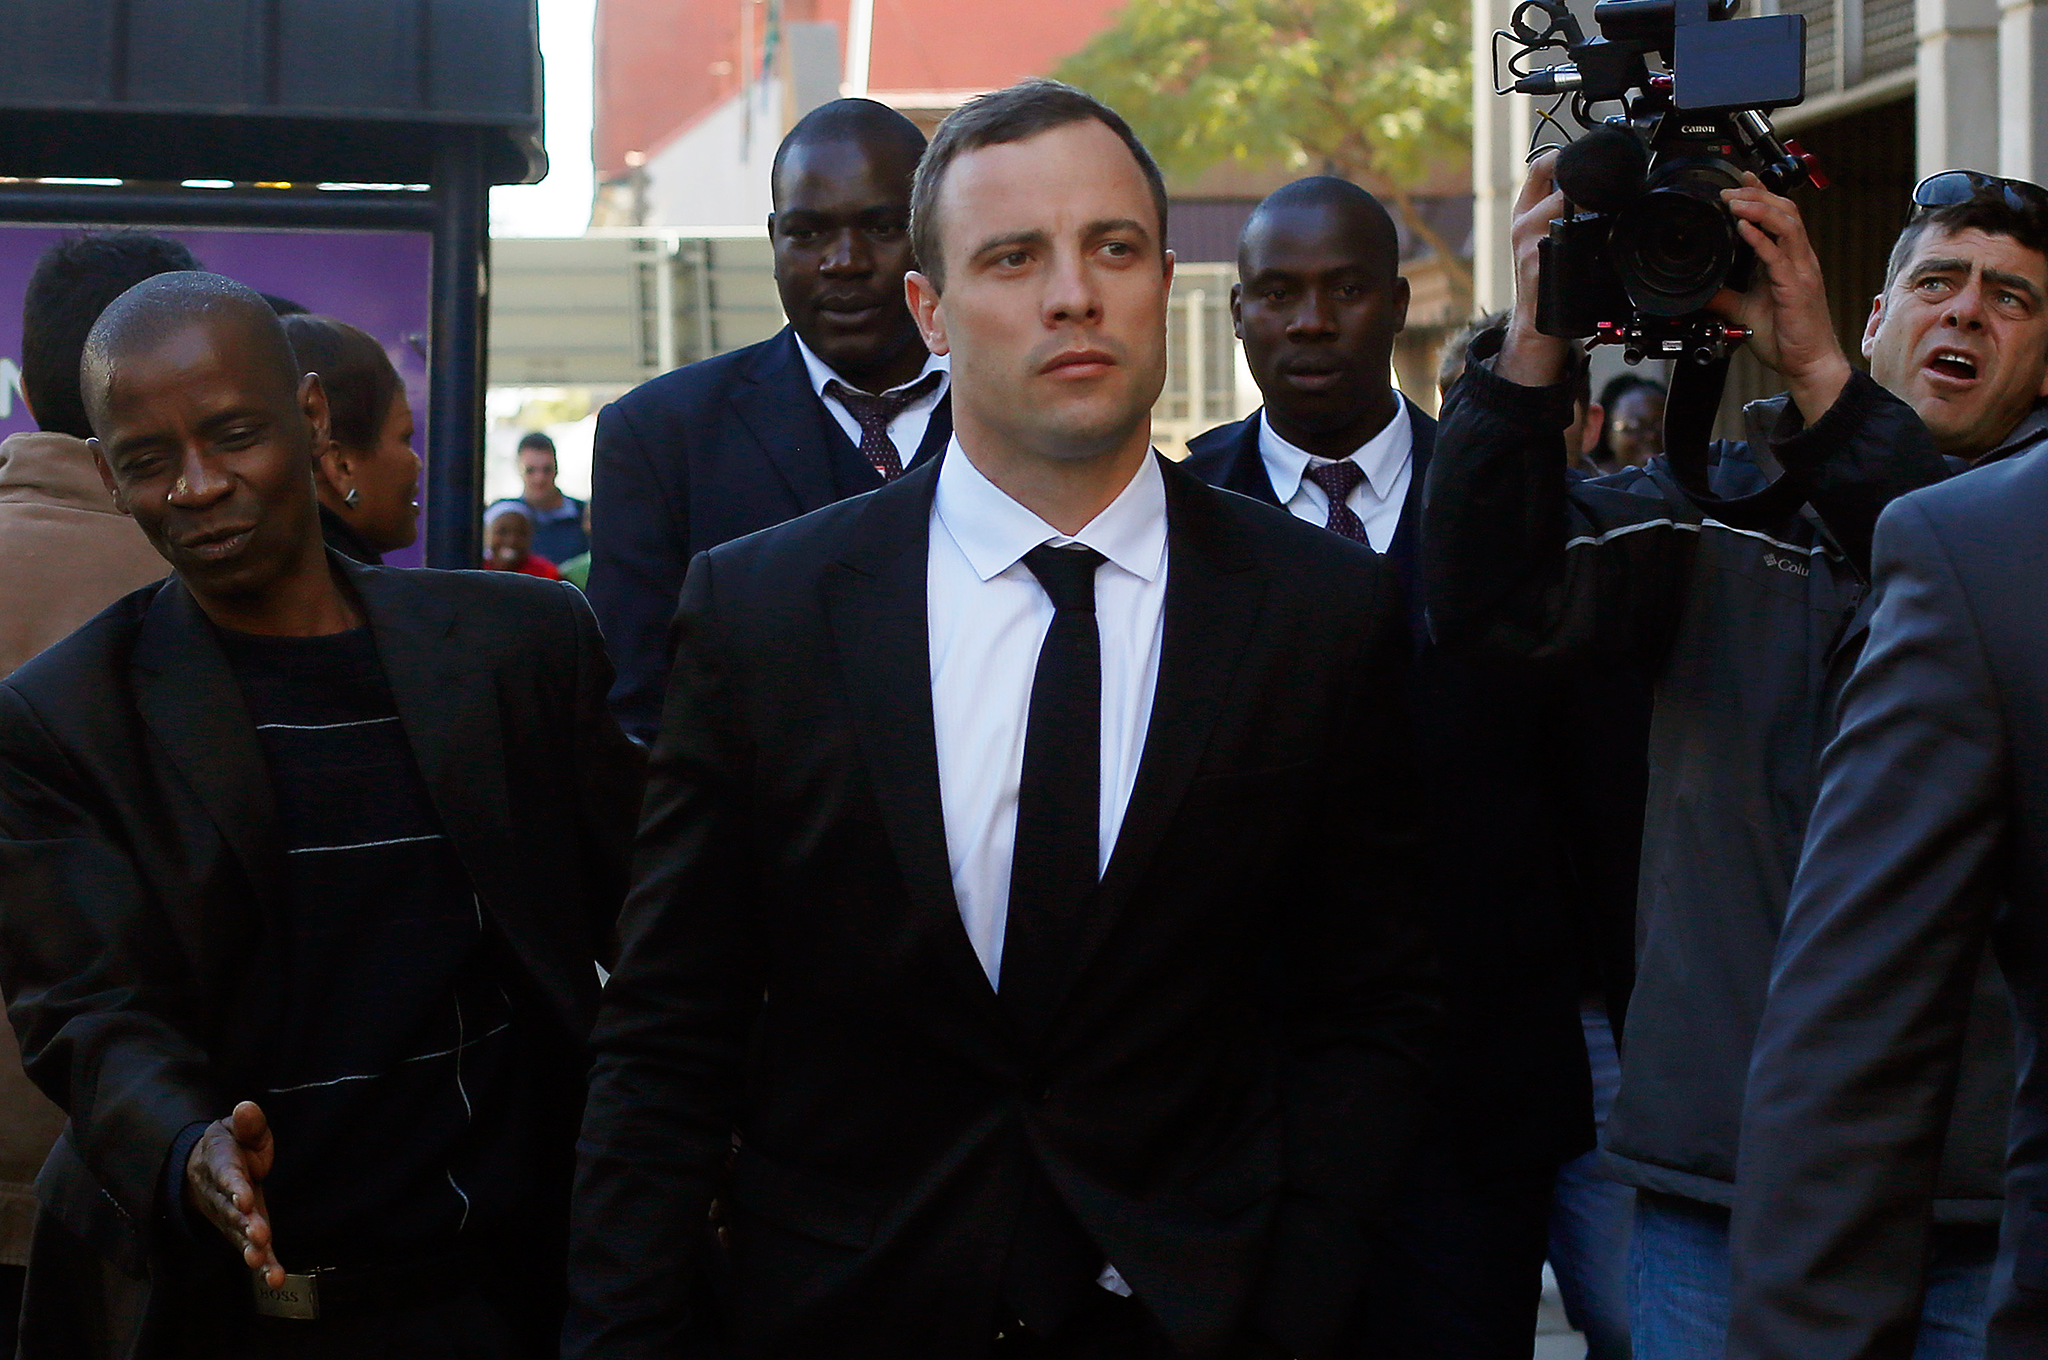 Oscar Pistorius leaves court in Pretoria, South Africa in his ongoing murder trail. Prosecutors and lawyers for Oscar Pistorius have one last chance to convince a South African judge when they present closing arguments this week